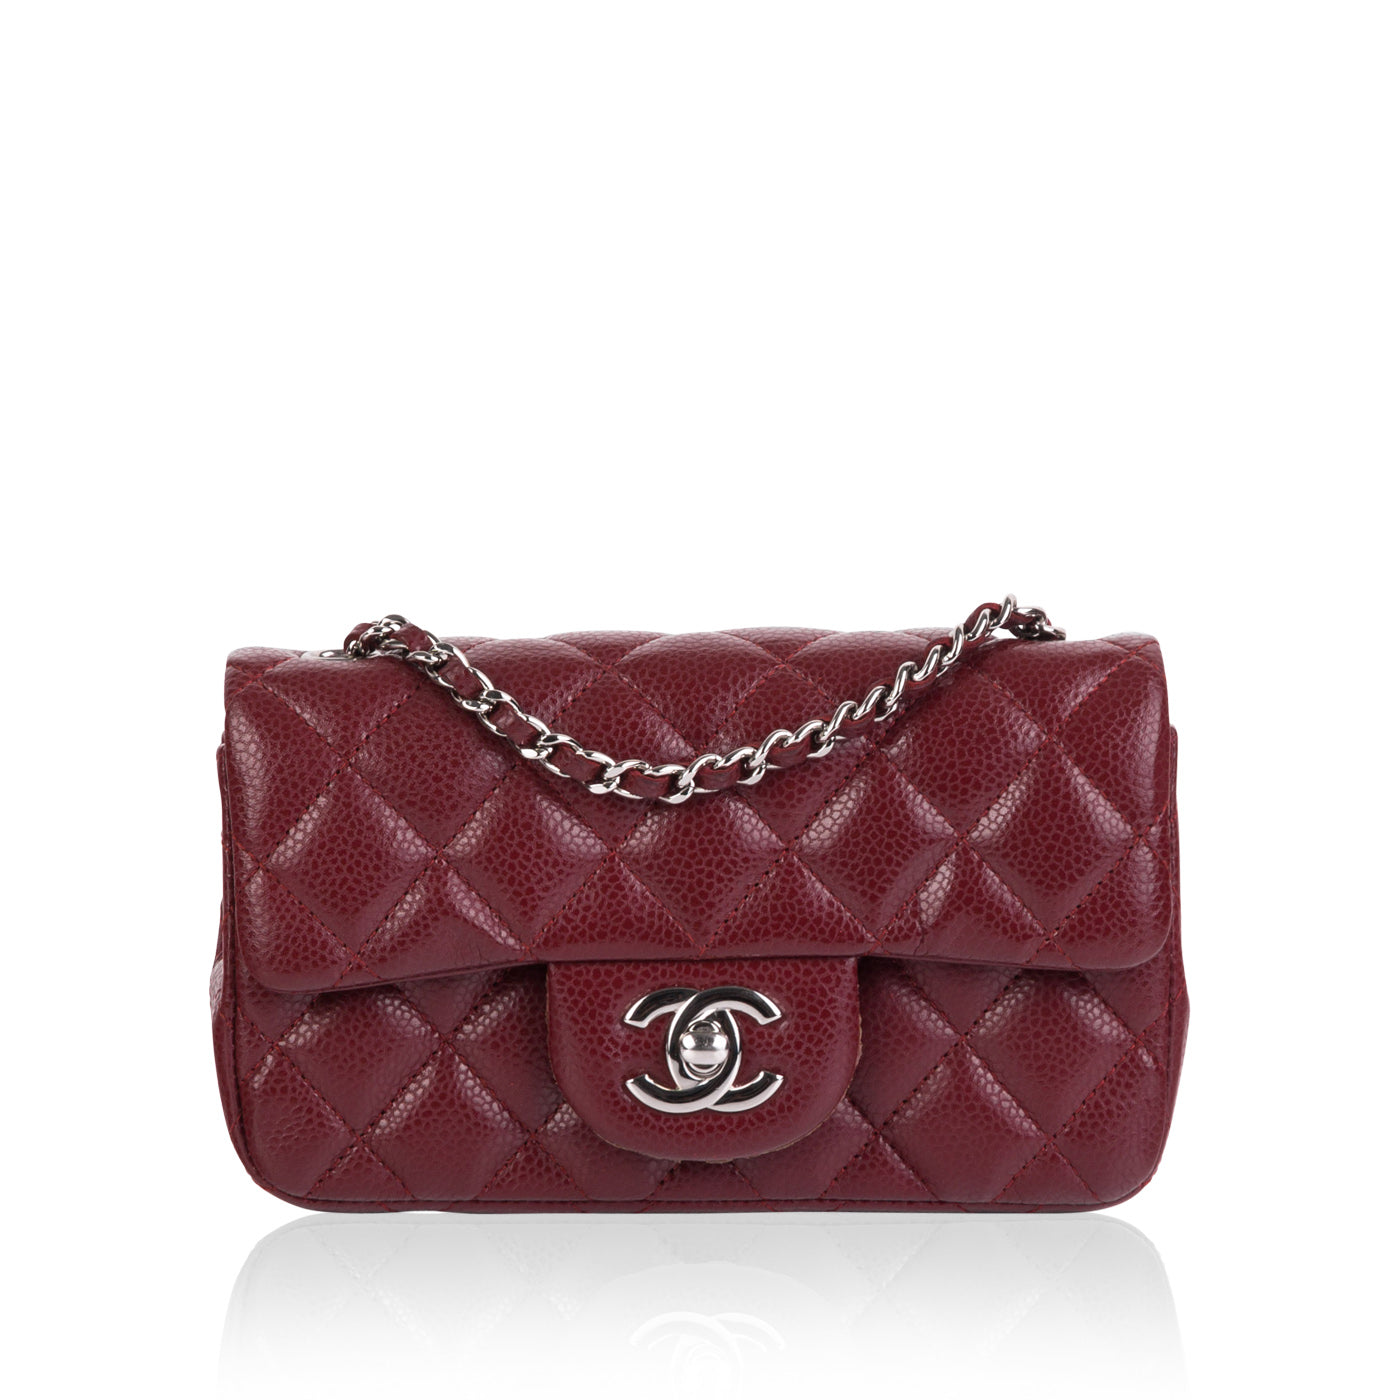 Itty-Bitty Chanel Mini Bags Have Captured The Hearts Of Our